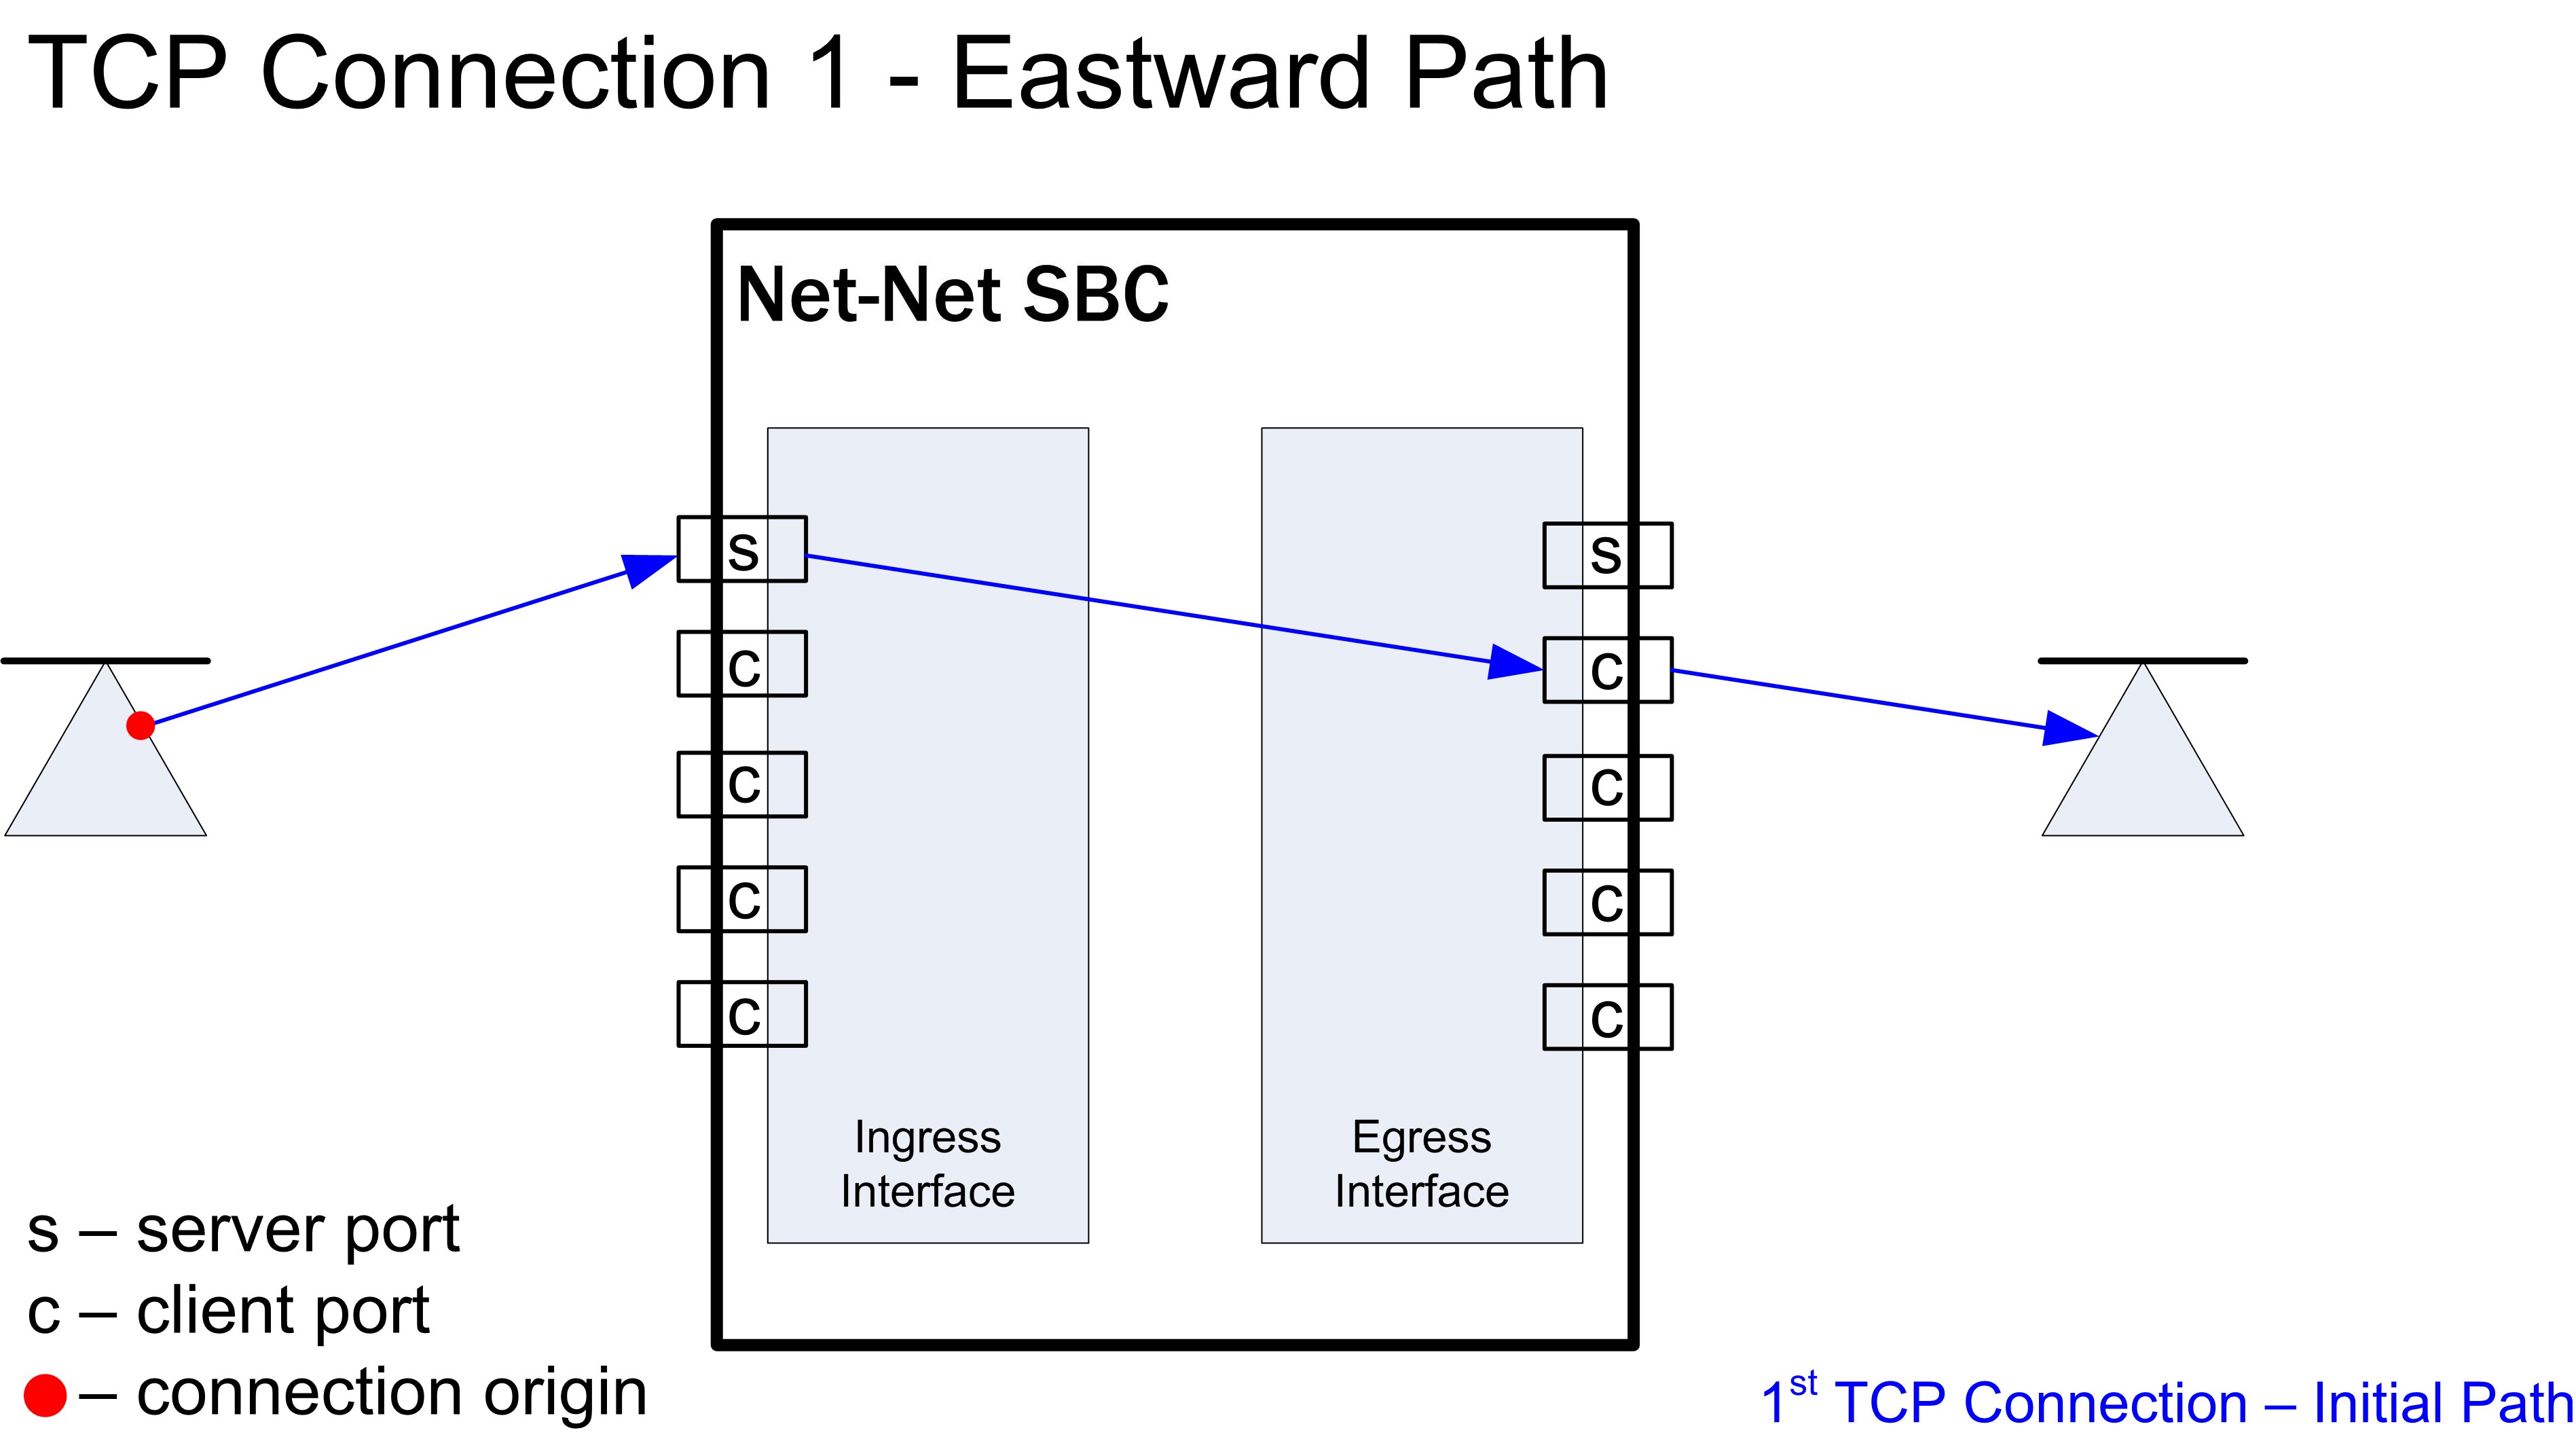 This image shows an eastward TCP flow through the SBC.